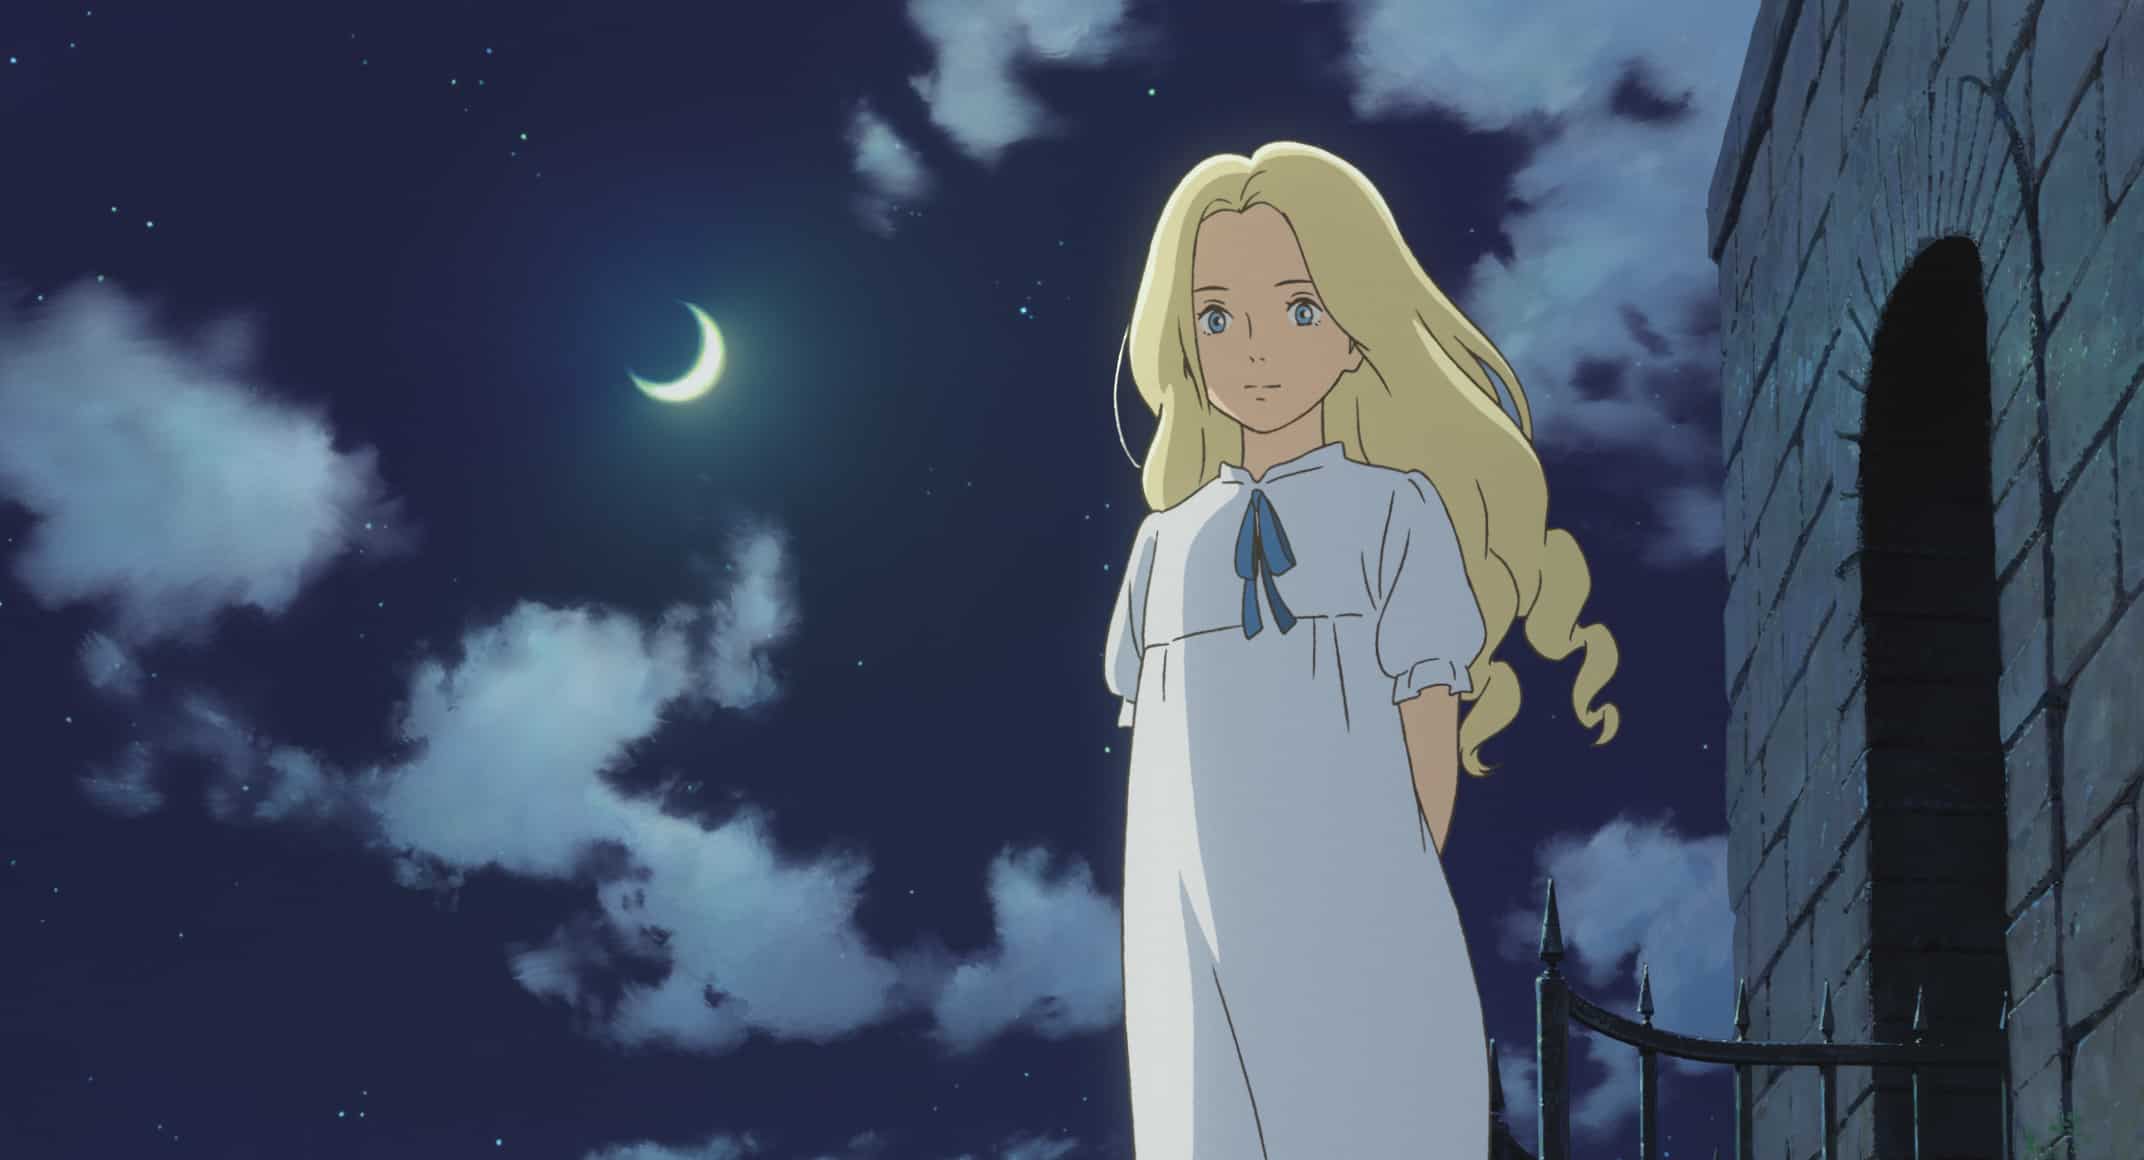 A blonde anime girl stands outside in the moonlight in this image from Studio Ghibli.